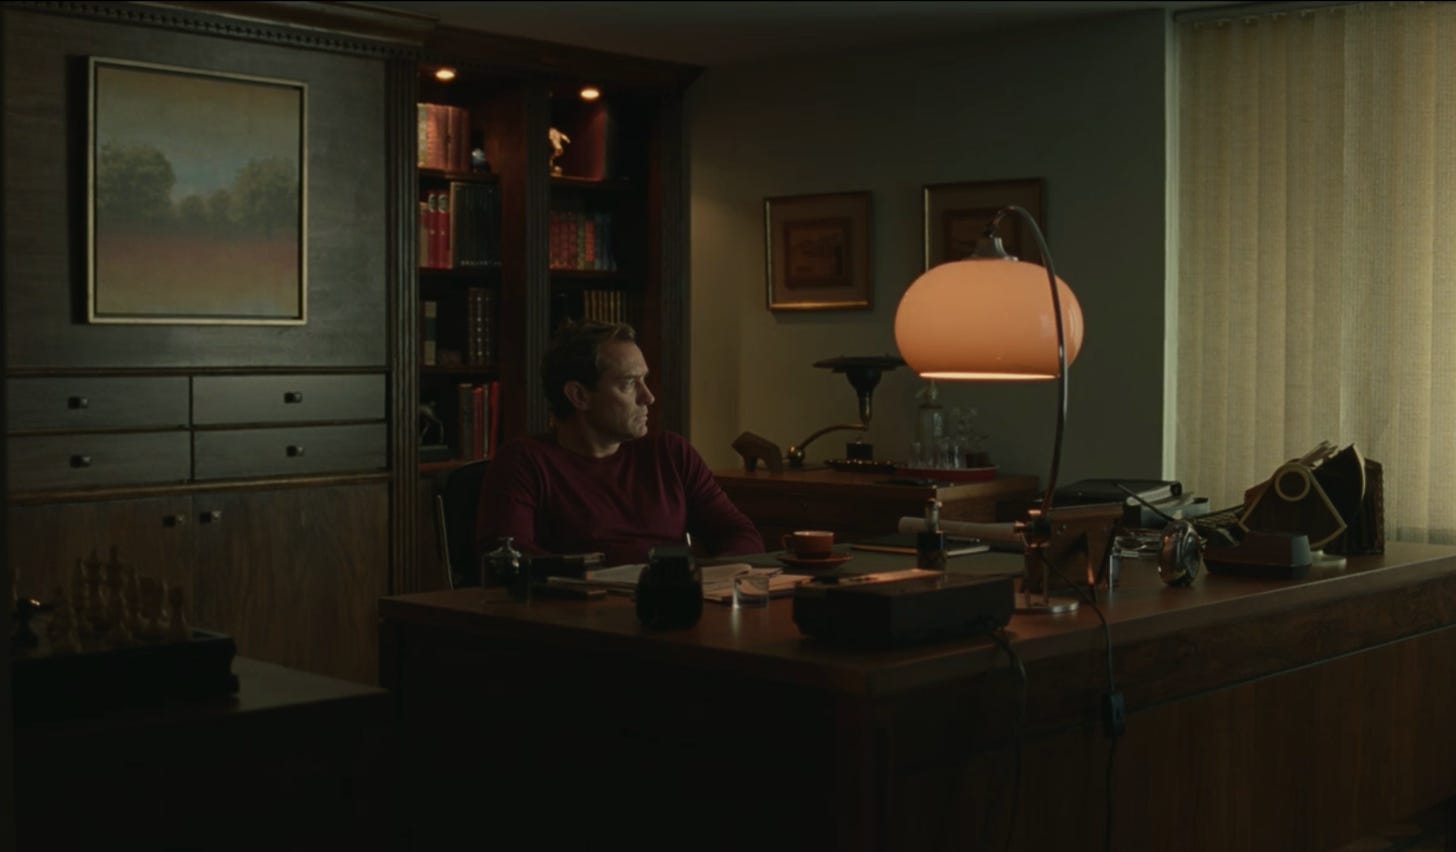 Jude Law in a home office, illuminated by a desk lamp, looking miserable, tbh